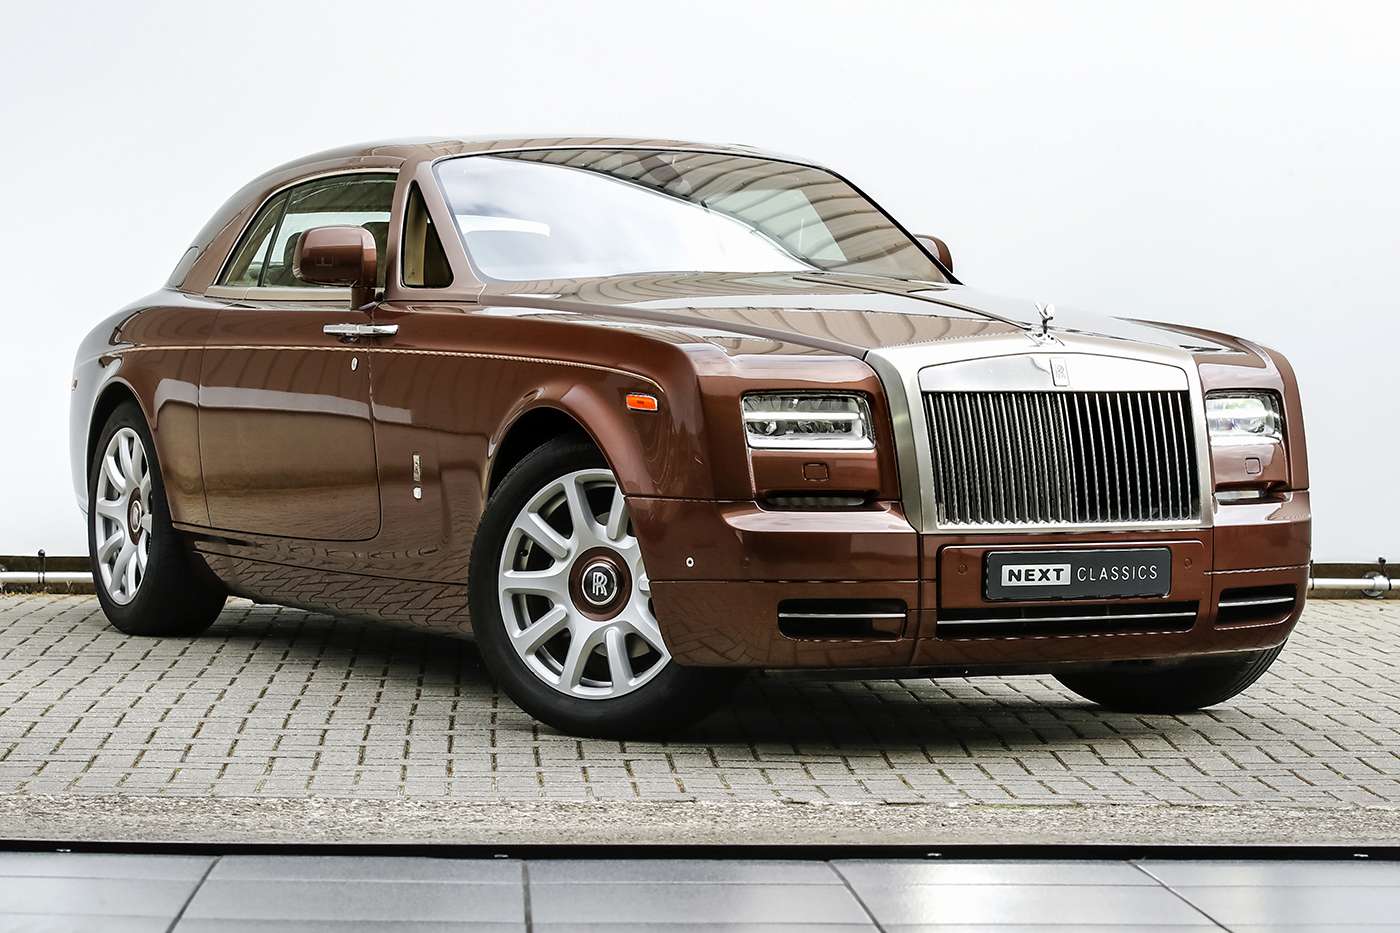 Rolls-Royce Phantom Coupe in Brown used in LIMMEN for € 375,000.-